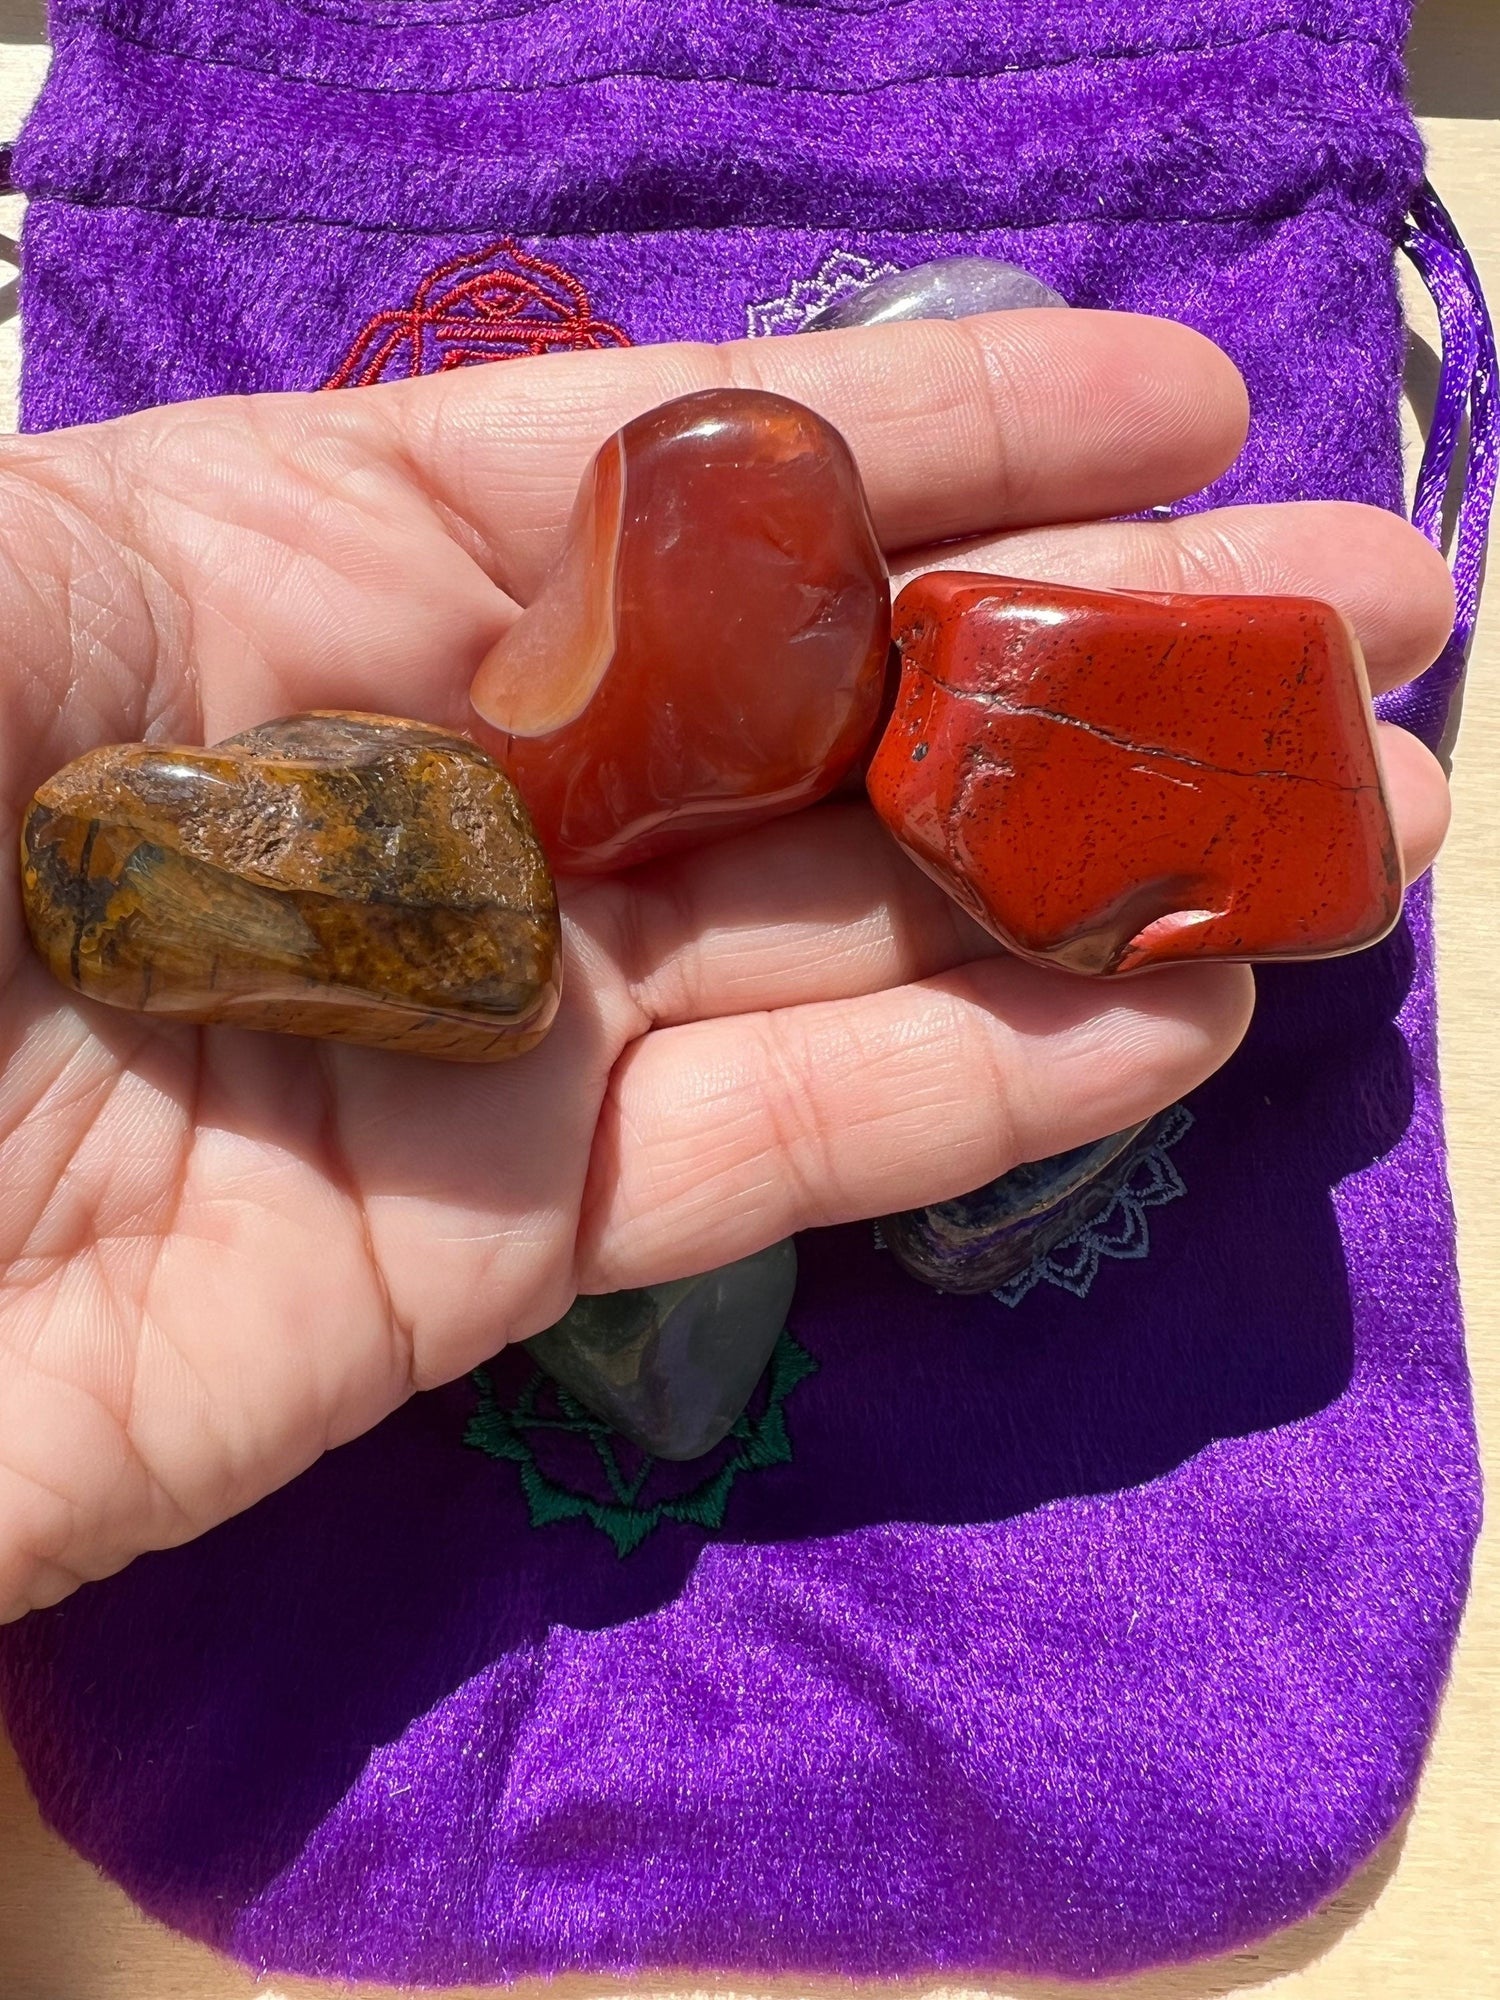 XL 8 Tumble Crystal Chakra Set with Matching Pouch and Selenite | High Quality 8 Tumble Crystal Starter Kit Info Card Included